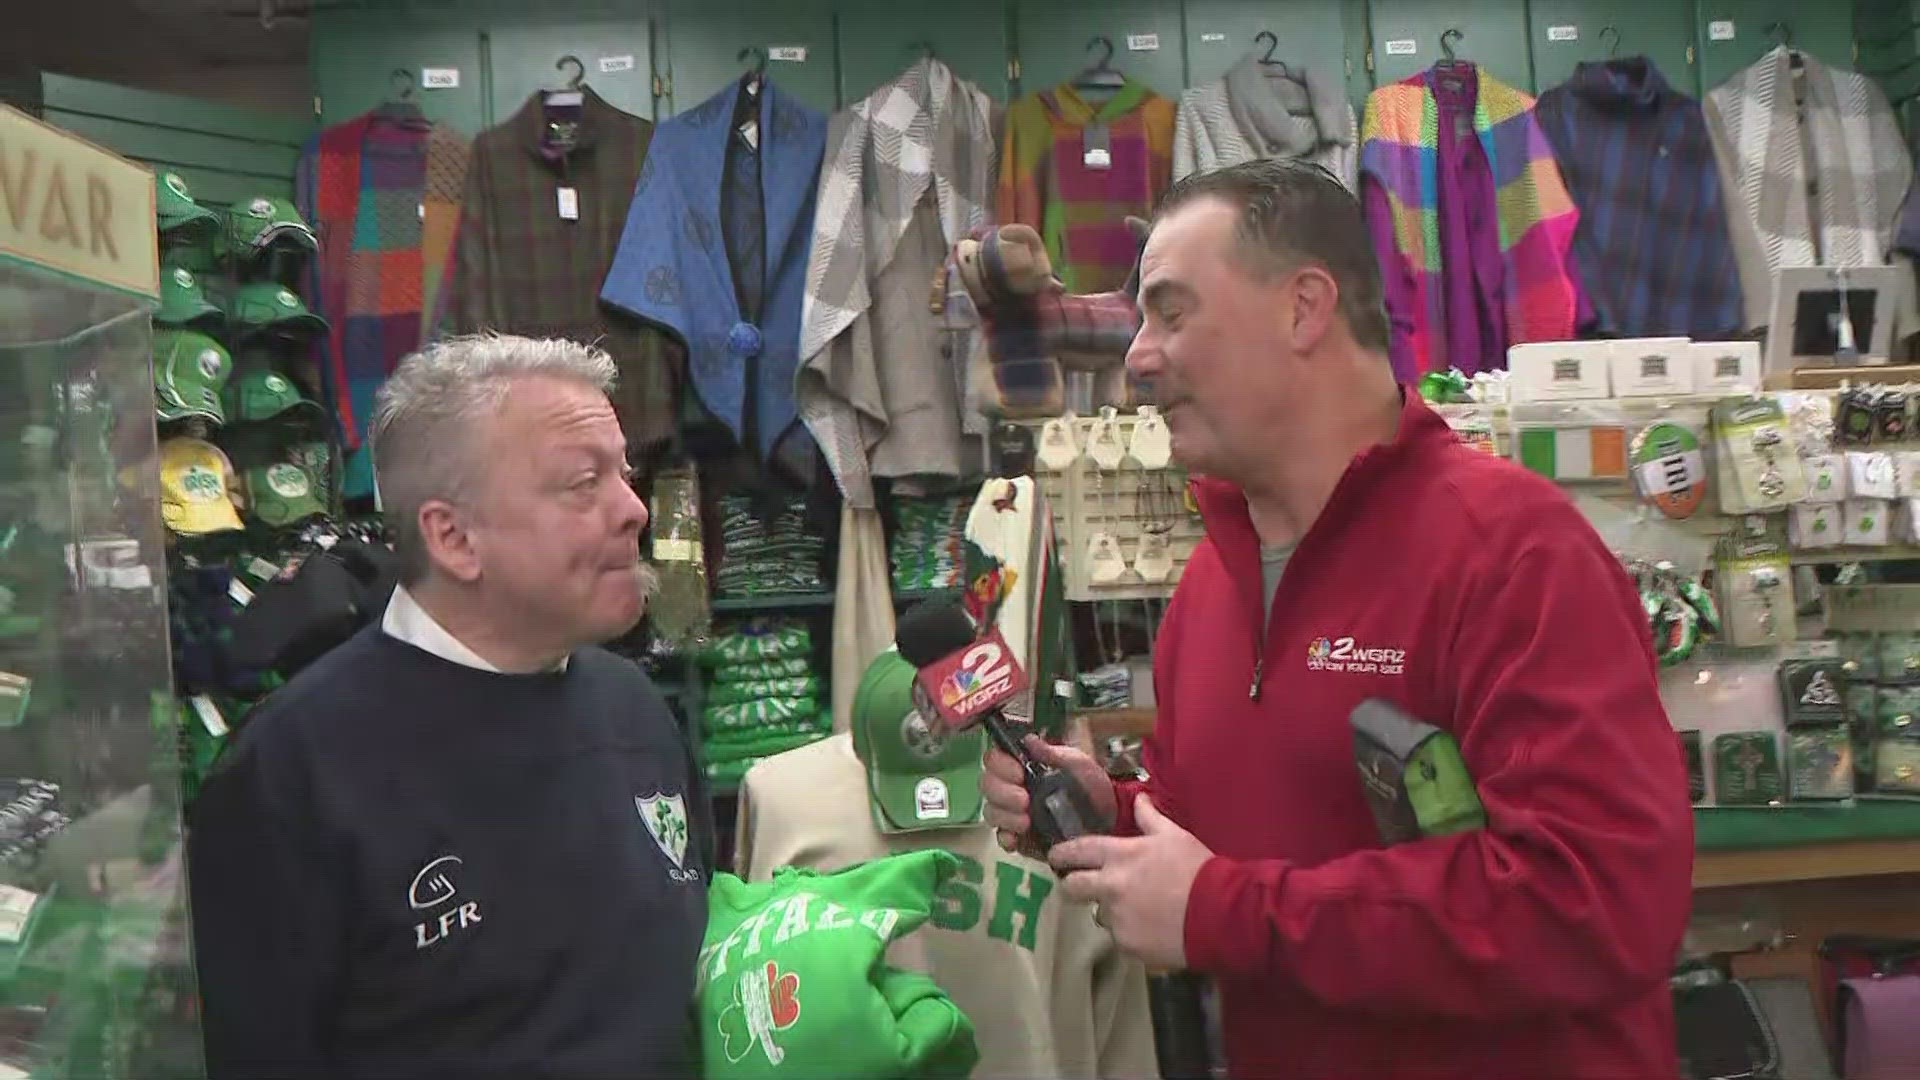 Getting into the Irish spirit with Kevin O'Neill at Tara Gift Shoppe